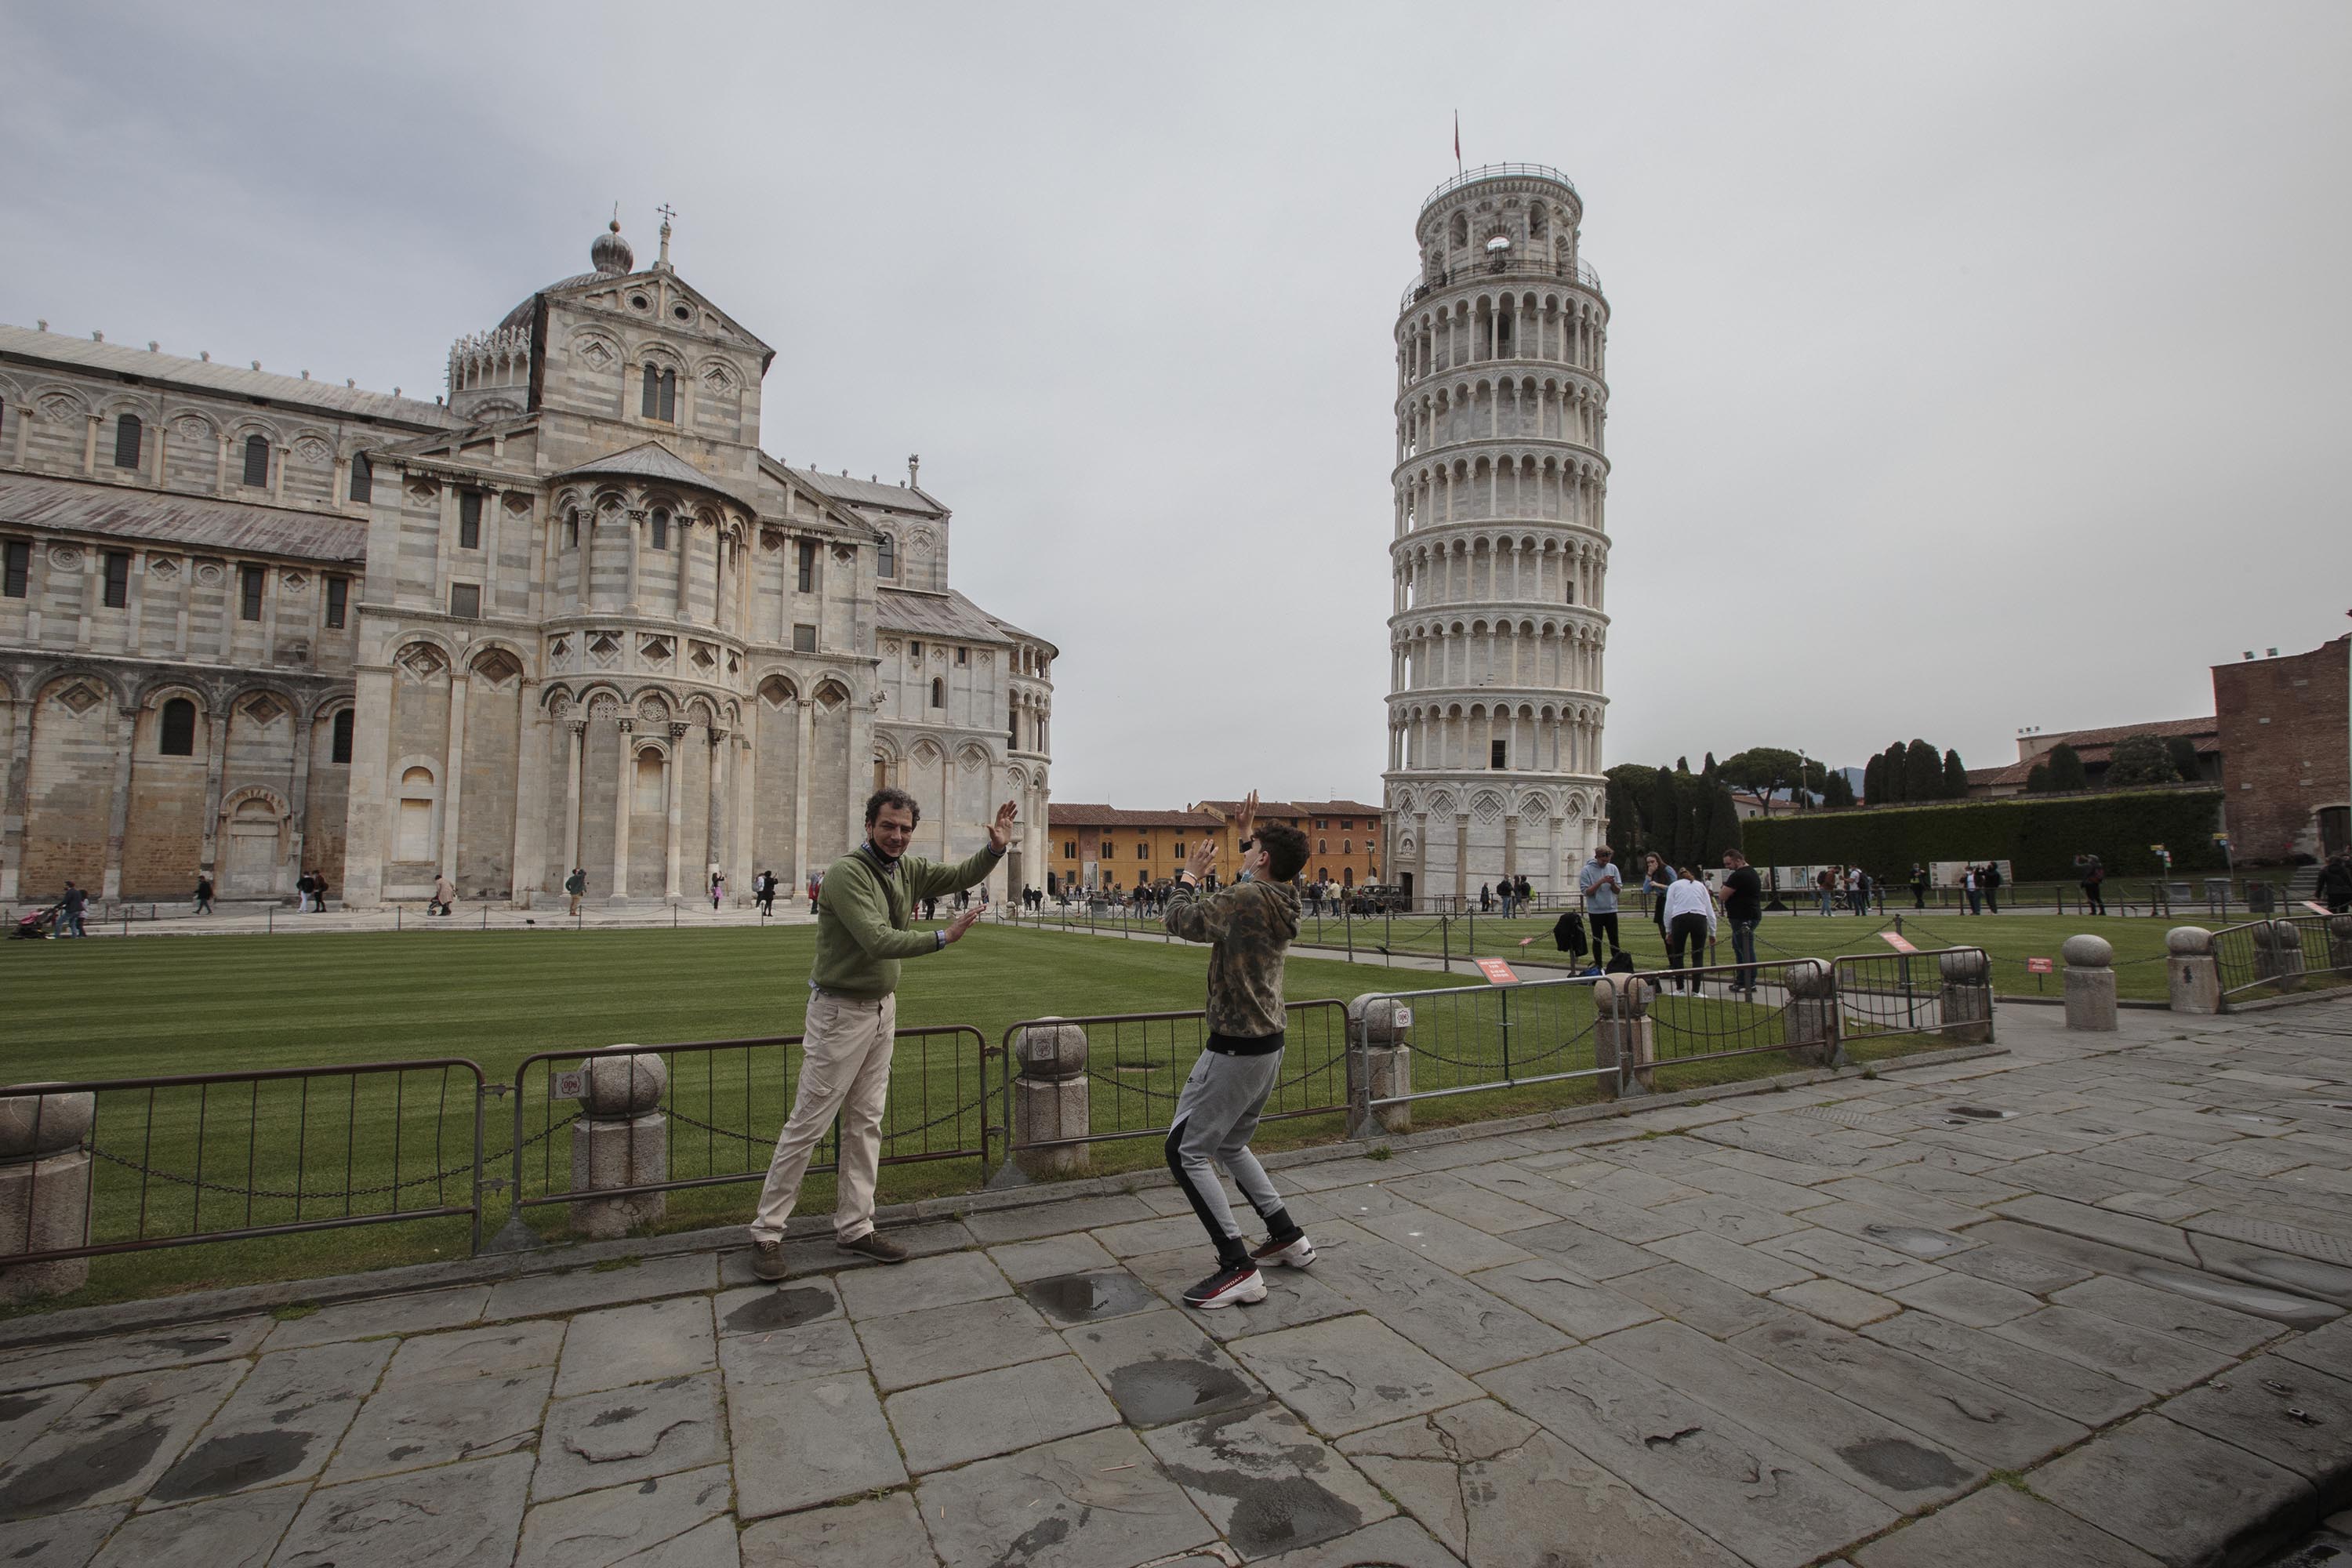 Tourists visiits leaning tower has opened to the public, in Pisa, Italy, on May, 1st, 2021. After months of harsh lockdown, Italy has decided to open museums, arts buildings and theatres. (Photo by Enrico Mattia Del Punta/NurPhoto via Getty Images)